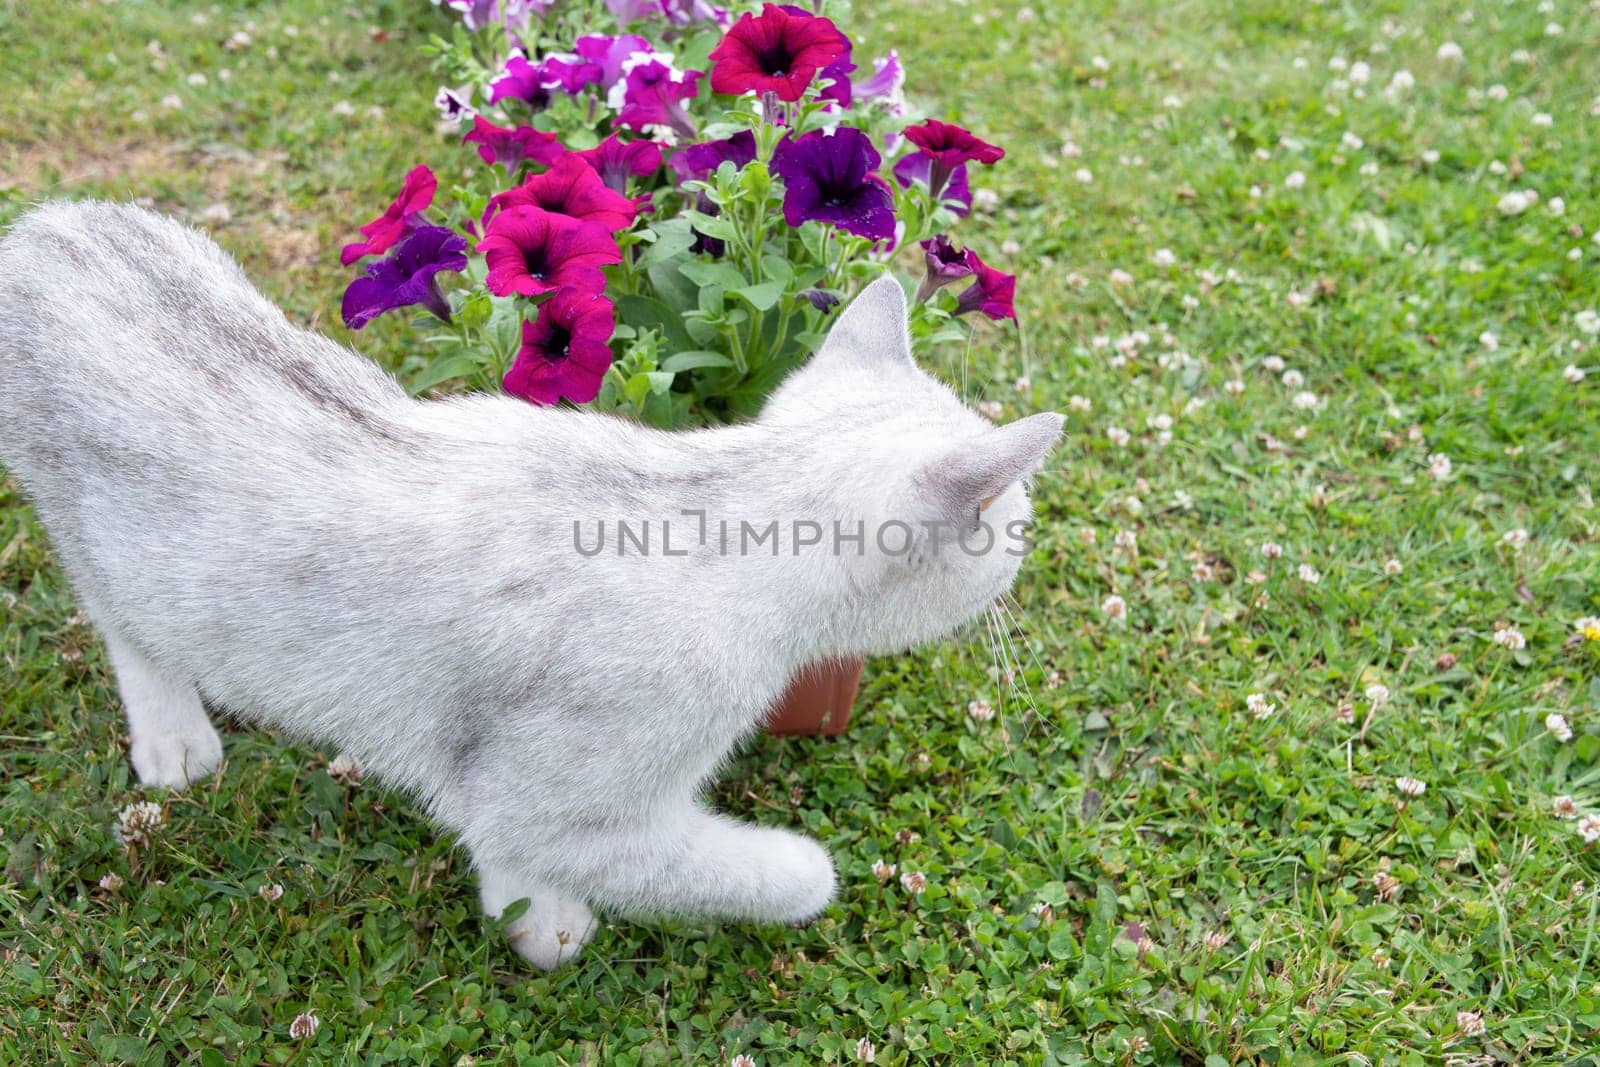 a little kitten sniffs the transplanted petunia flowers in pots, spring flowers by KaterinaDalemans